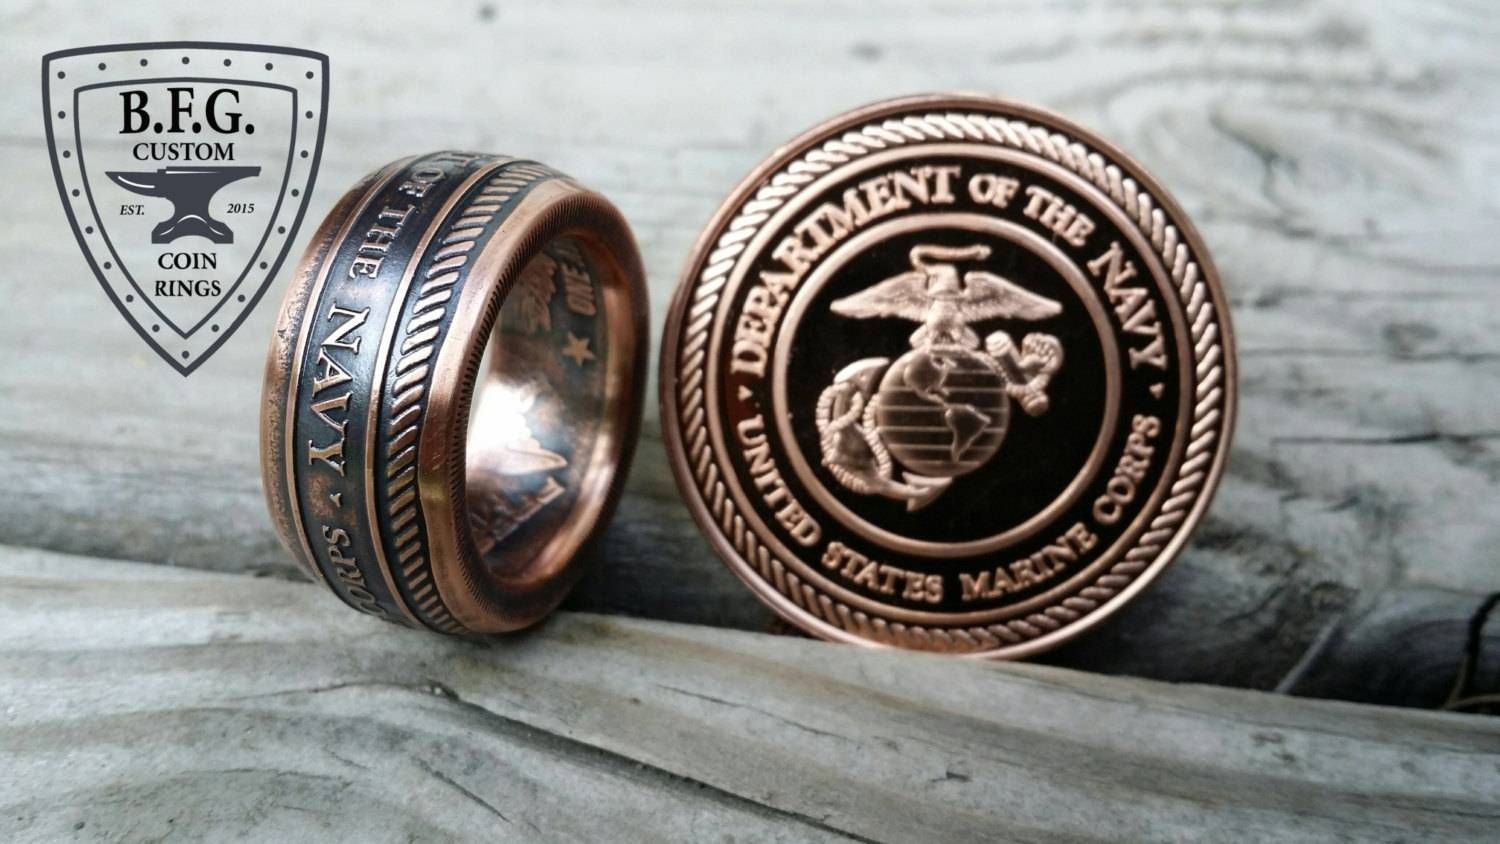 Usmc Wedding Band – Mens Wedding Rings Intended For Usmc Wedding Bands (View 11 of 15)